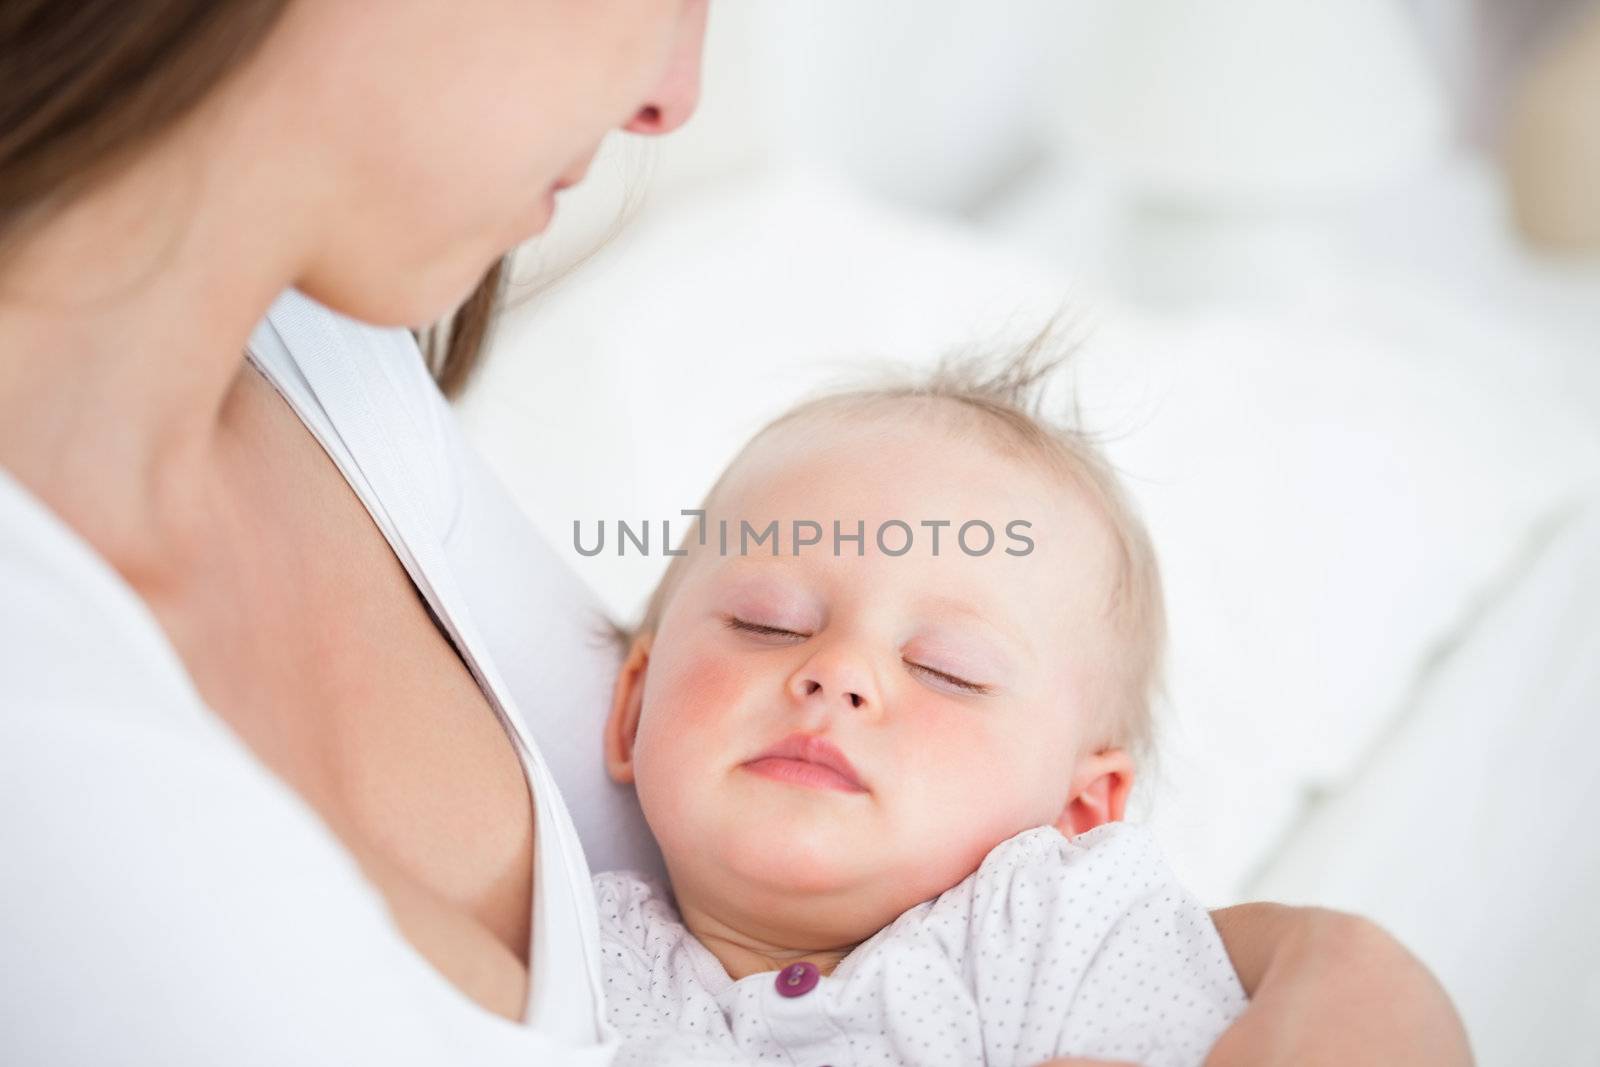 Baby falling asleep in the arms of her mother by Wavebreakmedia